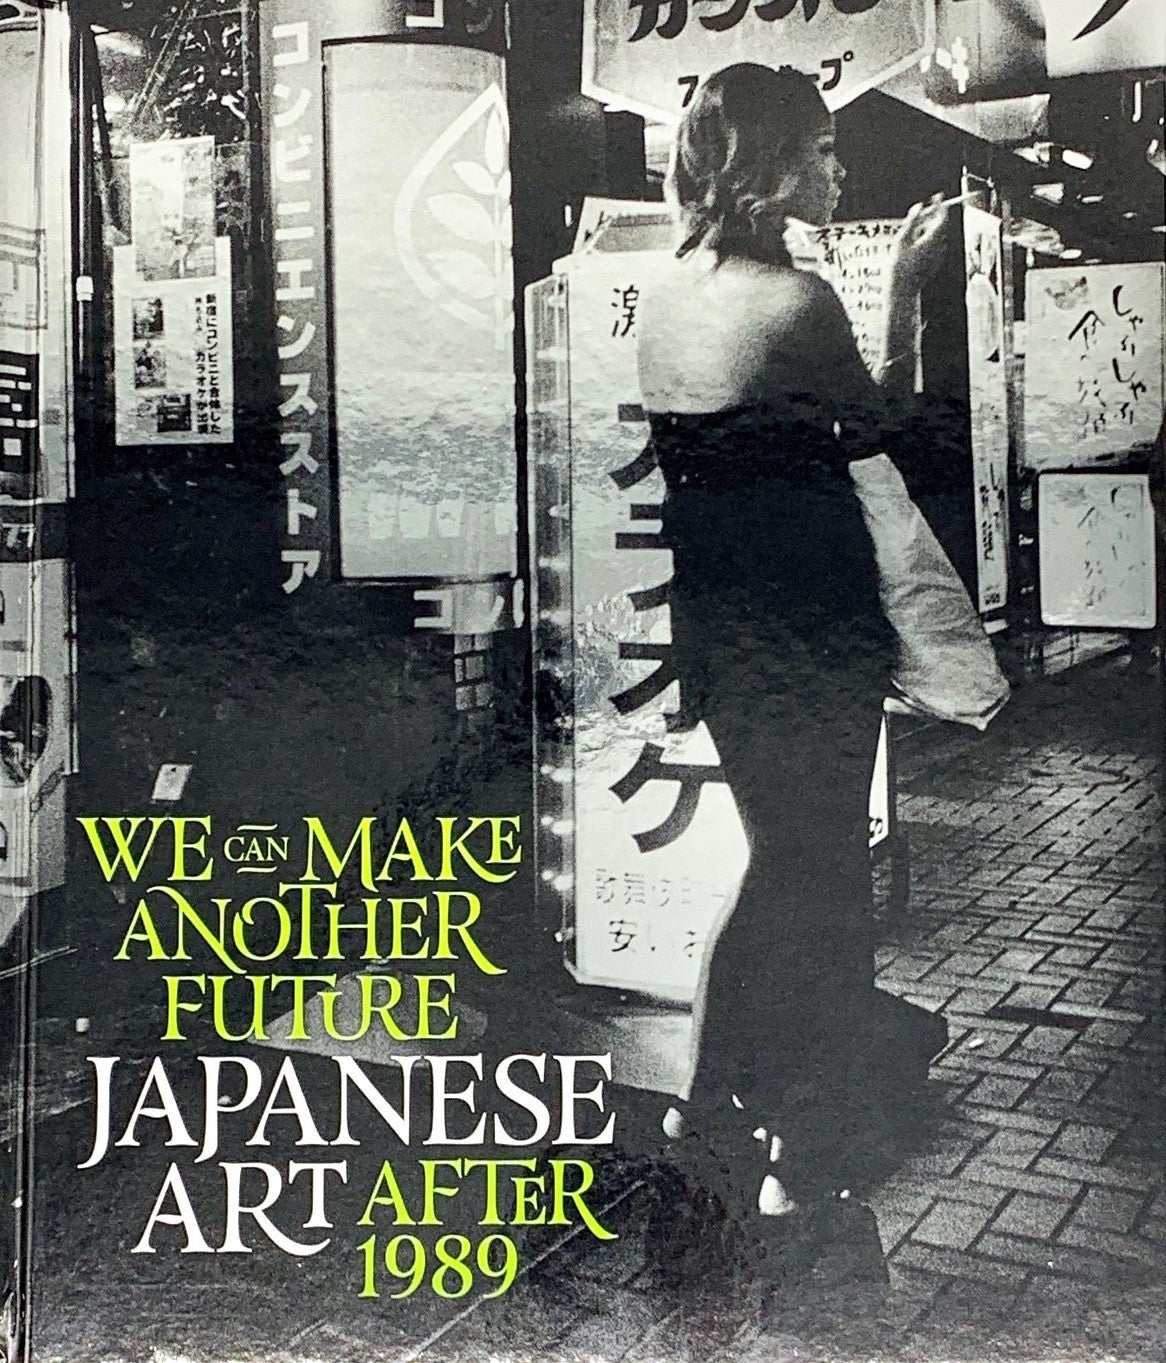 We Can Make Another Future: Japanese Art After 1989